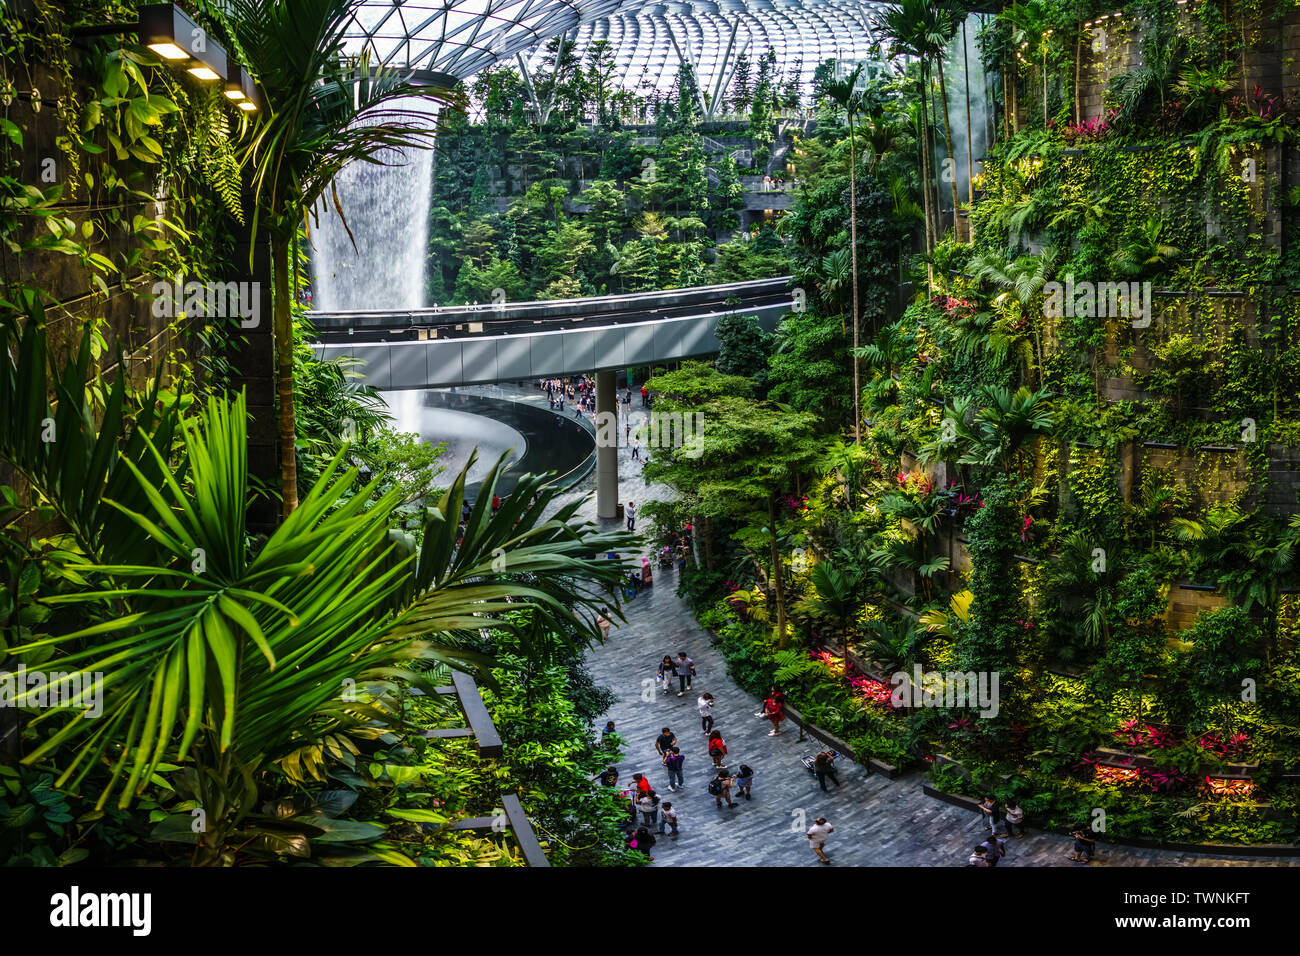 Singapore - Jun 11,  2019: HSBC Rain Vortex. Jewel Changi Airport is a mixed-use development at Changi Airport in Singapore, opened in April 2019. Stock Photo